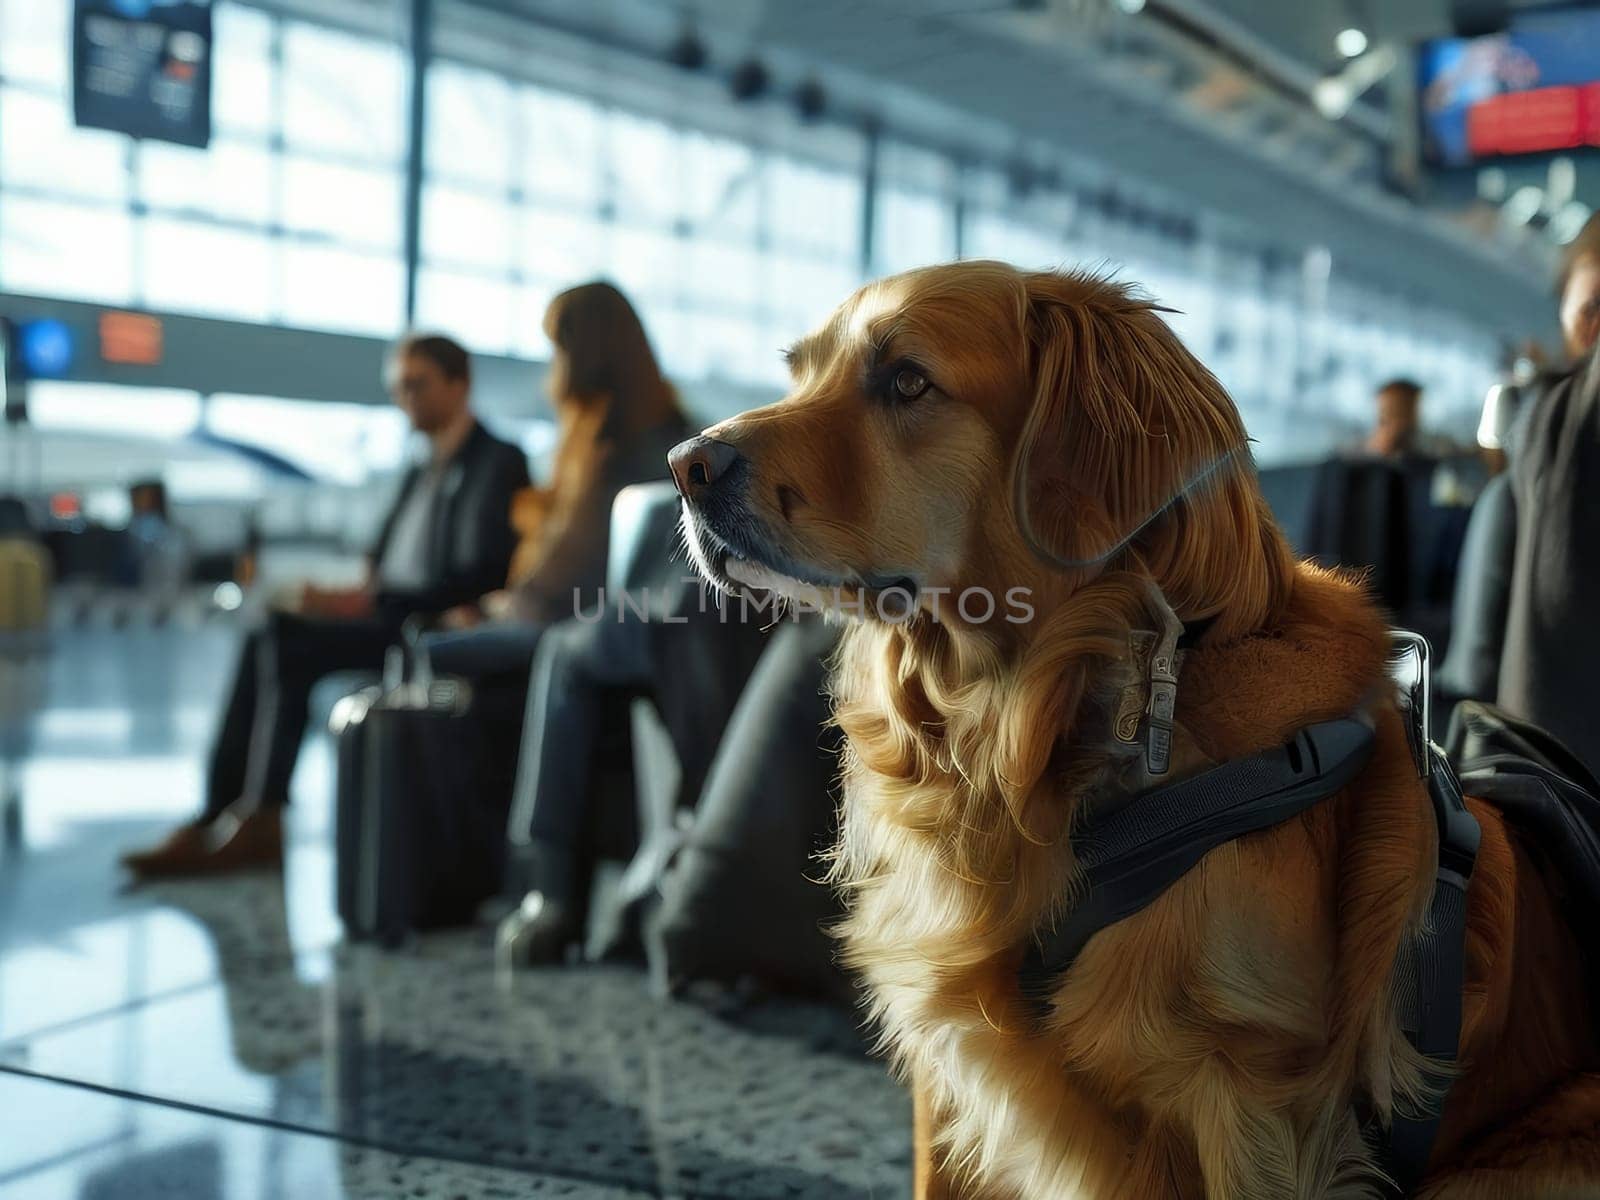 Dog sitting near suitcase in airport terminal interior by fascinadora